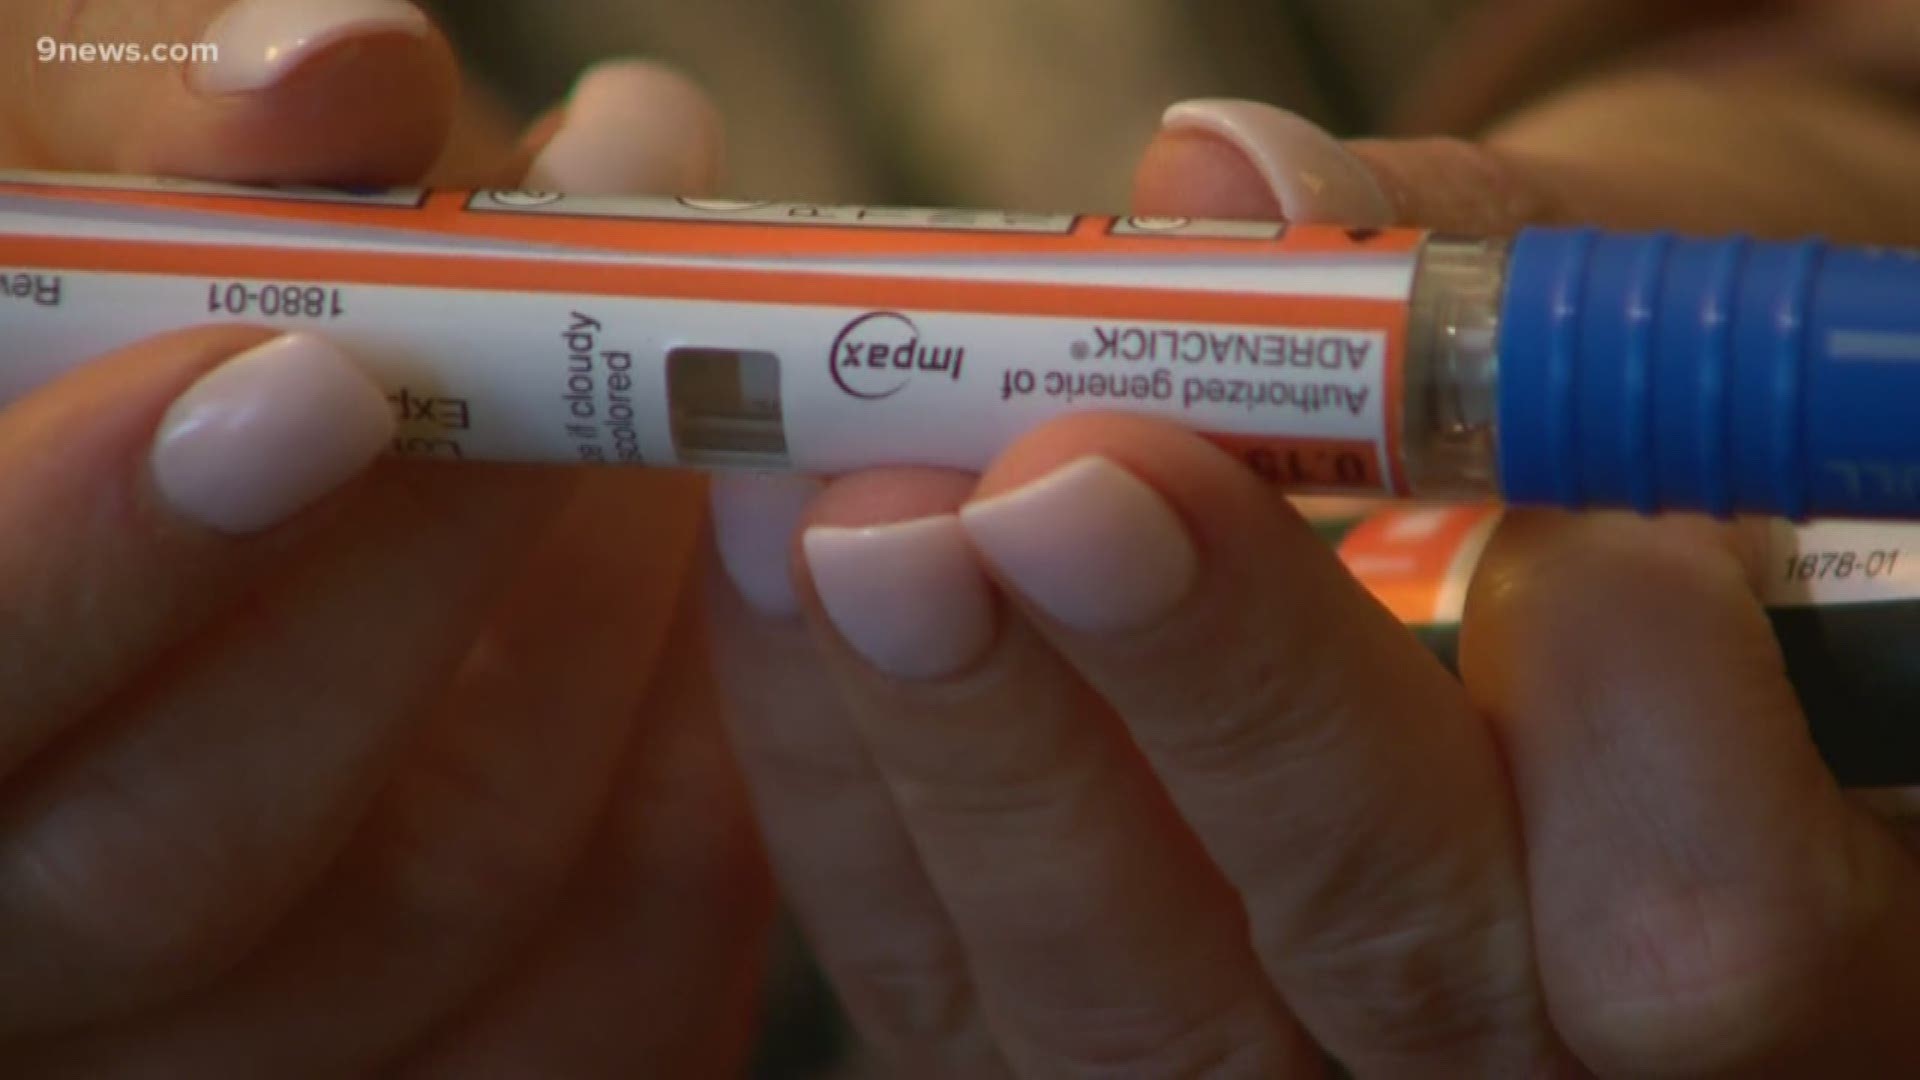 Medical experts say there's been a limited supply of epinephrine for at least a year now.